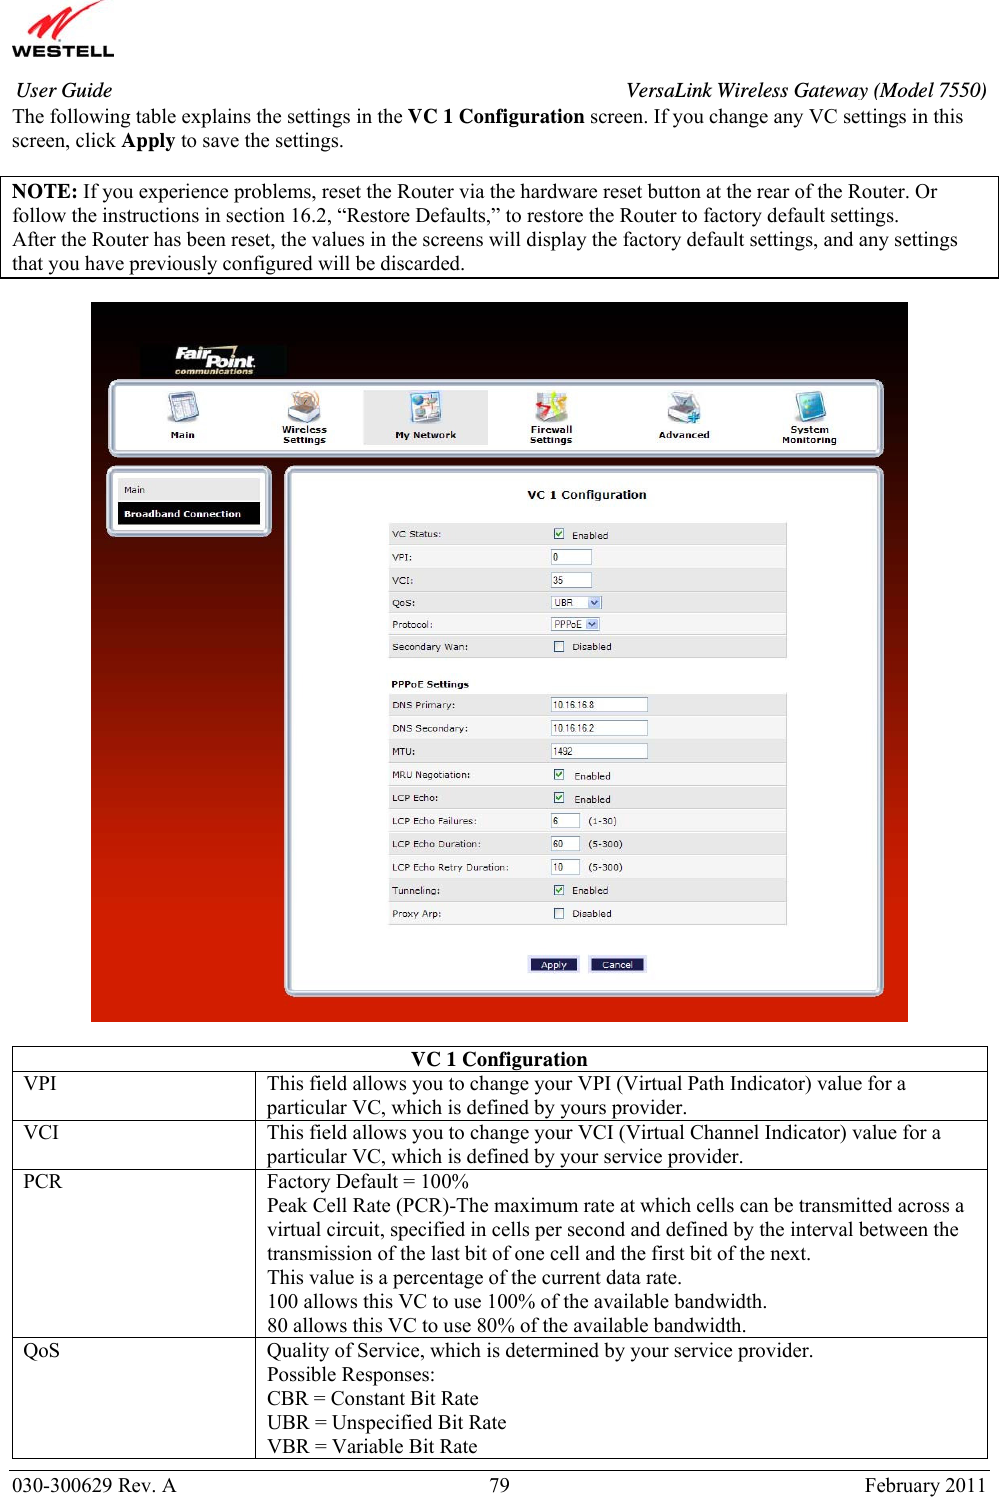       030-300629 Rev. A  79       February 2011 User Guide  VersaLink Wireless Gateway (Model 7550)The following table explains the settings in the VC 1 Configuration screen. If you change any VC settings in this screen, click Apply to save the settings.  NOTE: If you experience problems, reset the Router via the hardware reset button at the rear of the Router. Or follow the instructions in section 16.2, “Restore Defaults,” to restore the Router to factory default settings. After the Router has been reset, the values in the screens will display the factory default settings, and any settings that you have previously configured will be discarded.    VC 1 Configuration VPI  This field allows you to change your VPI (Virtual Path Indicator) value for a particular VC, which is defined by yours provider. VCI  This field allows you to change your VCI (Virtual Channel Indicator) value for a particular VC, which is defined by your service provider. PCR  Factory Default = 100% Peak Cell Rate (PCR)-The maximum rate at which cells can be transmitted across a virtual circuit, specified in cells per second and defined by the interval between the transmission of the last bit of one cell and the first bit of the next. This value is a percentage of the current data rate. 100 allows this VC to use 100% of the available bandwidth. 80 allows this VC to use 80% of the available bandwidth. QoS  Quality of Service, which is determined by your service provider. Possible Responses: CBR = Constant Bit Rate UBR = Unspecified Bit Rate VBR = Variable Bit Rate  